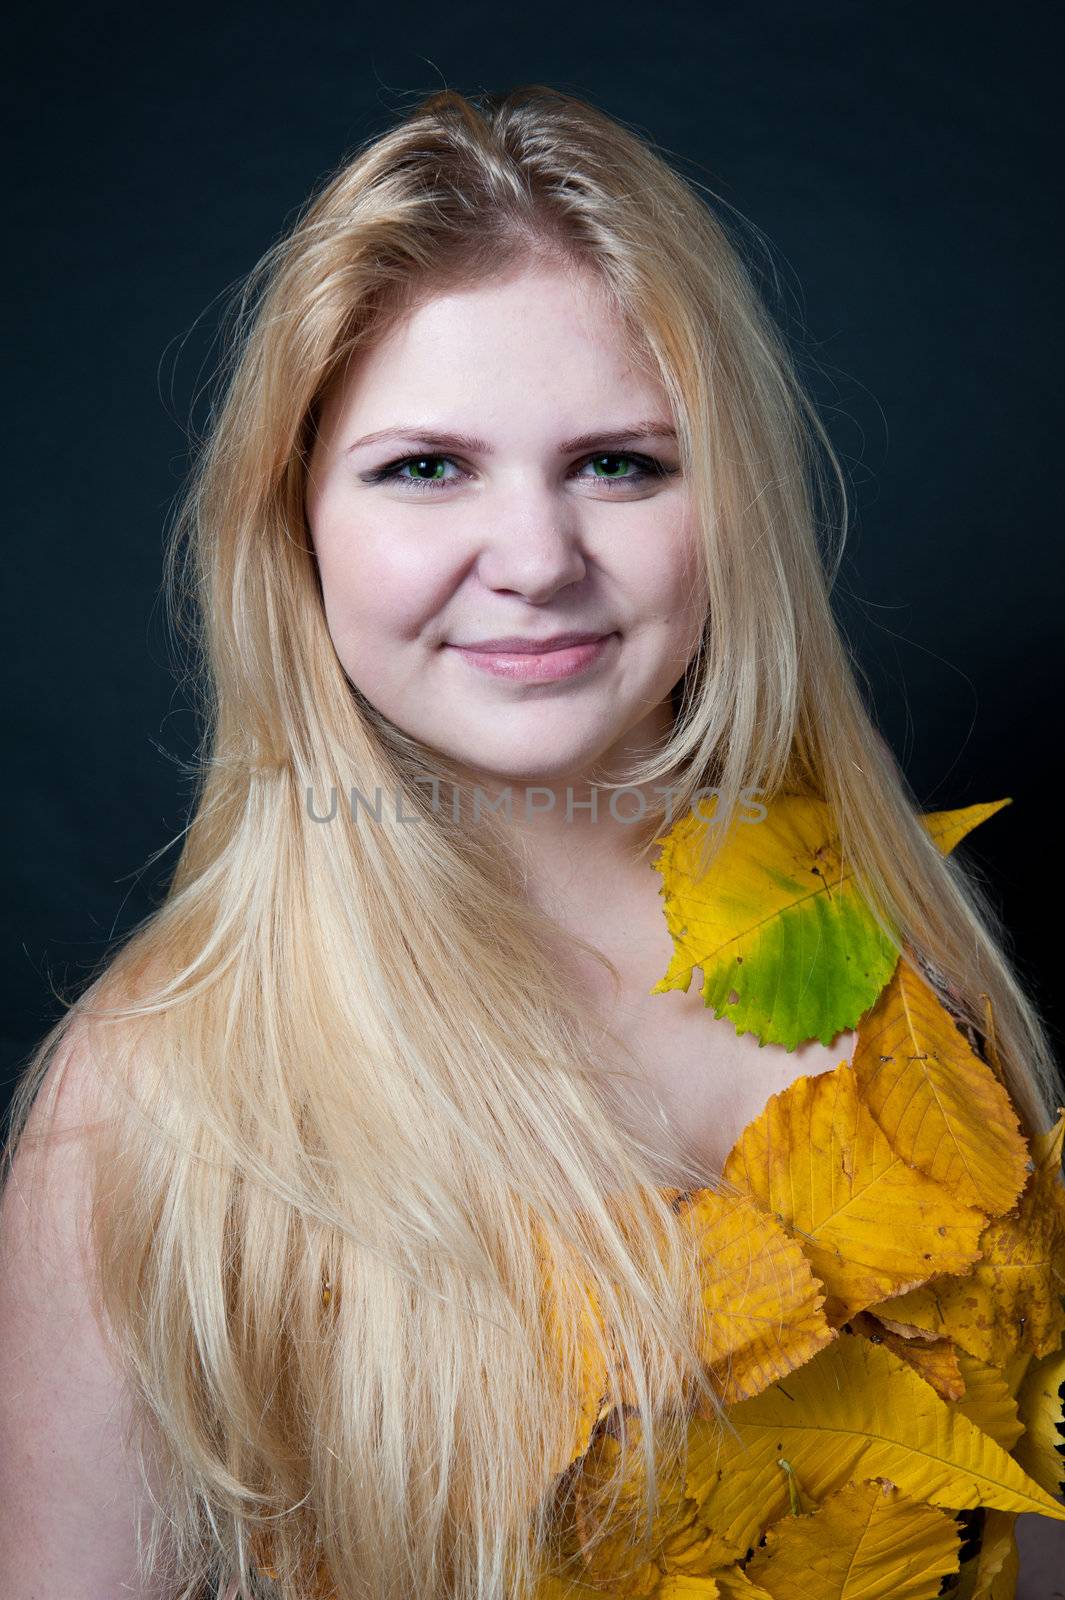 portrait girl in dress decorated with autumn leaves on black background